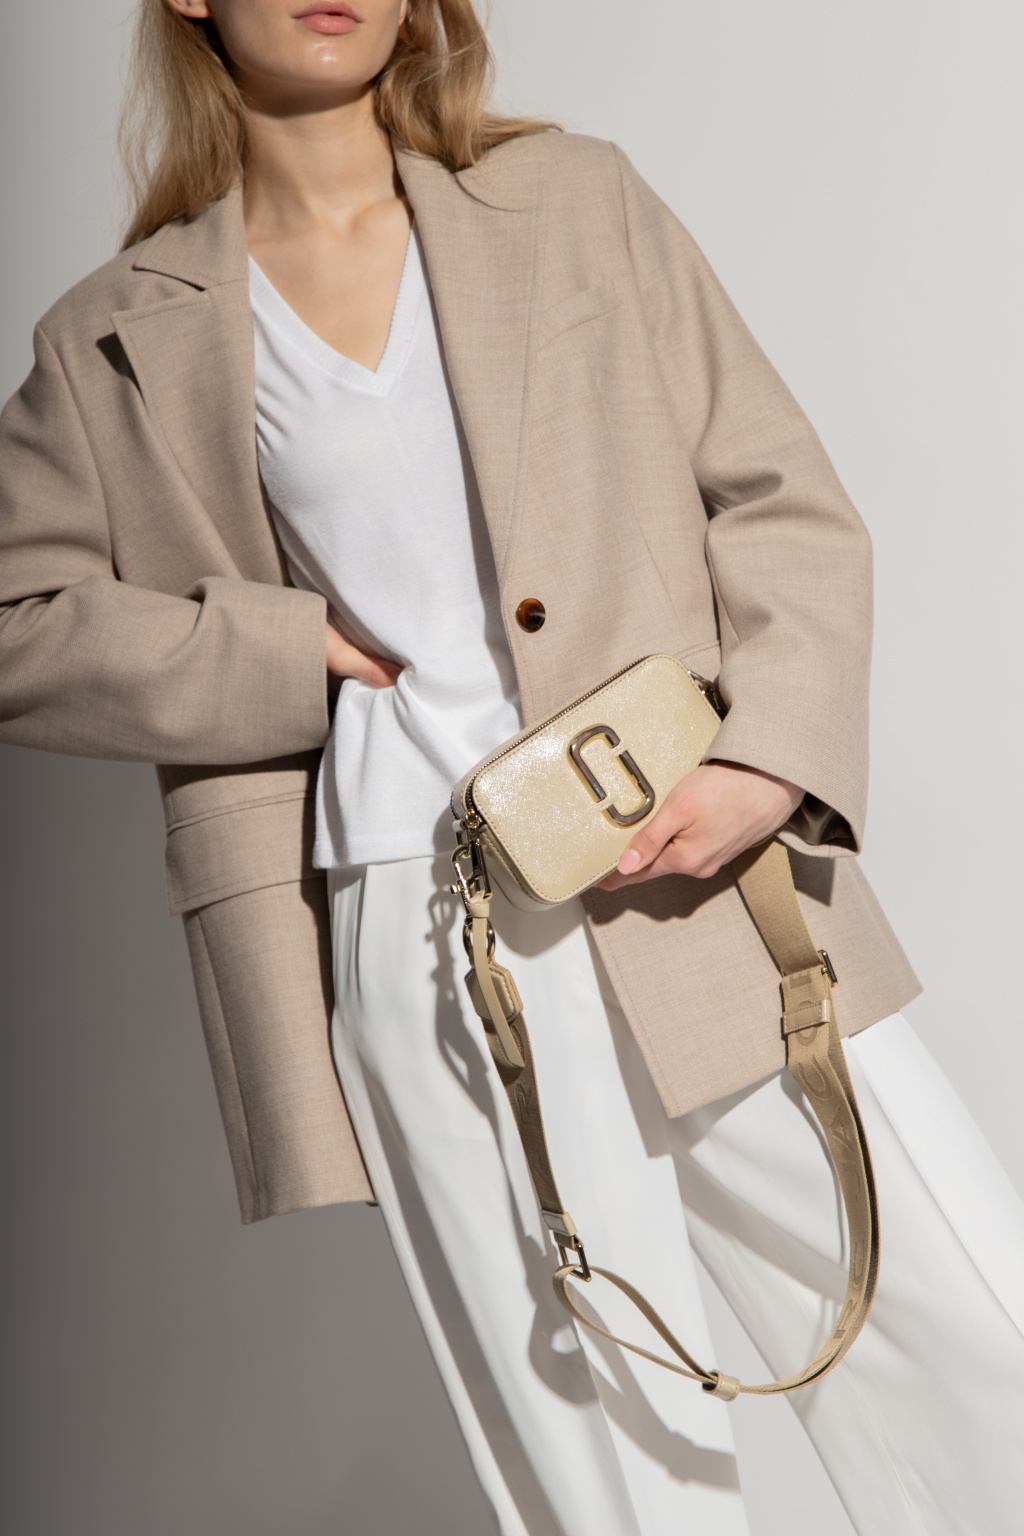 The J Marc Shoulder Bag of Marc Jacobs - Cognac and beige leather bag with  flap and shoulder strap for women